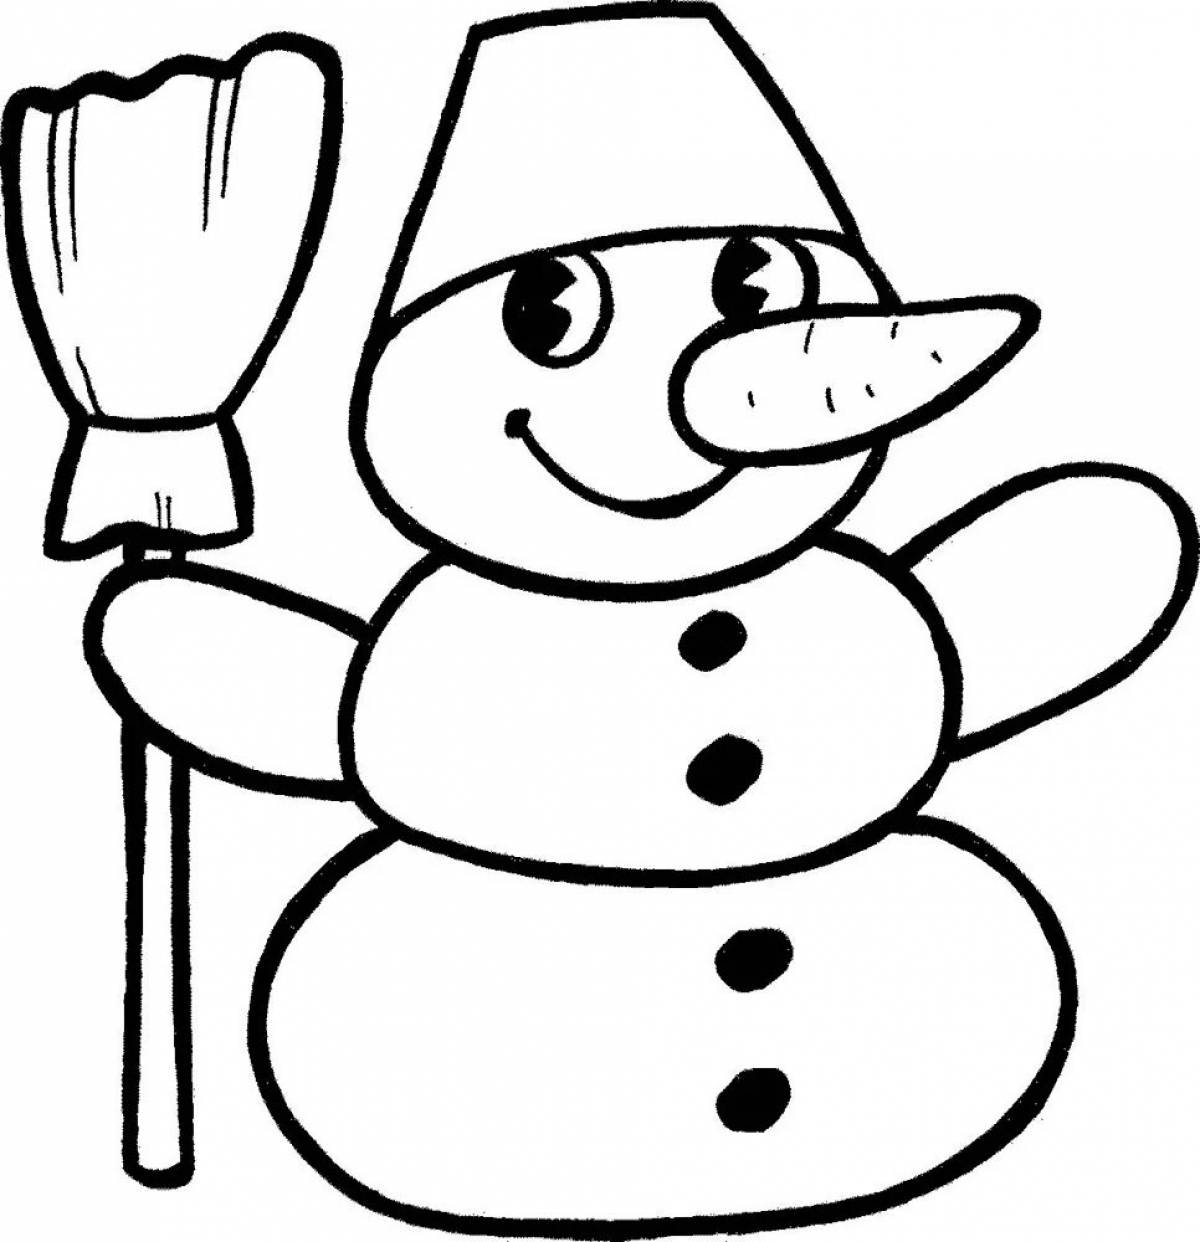 Snowman drawing for kids #6